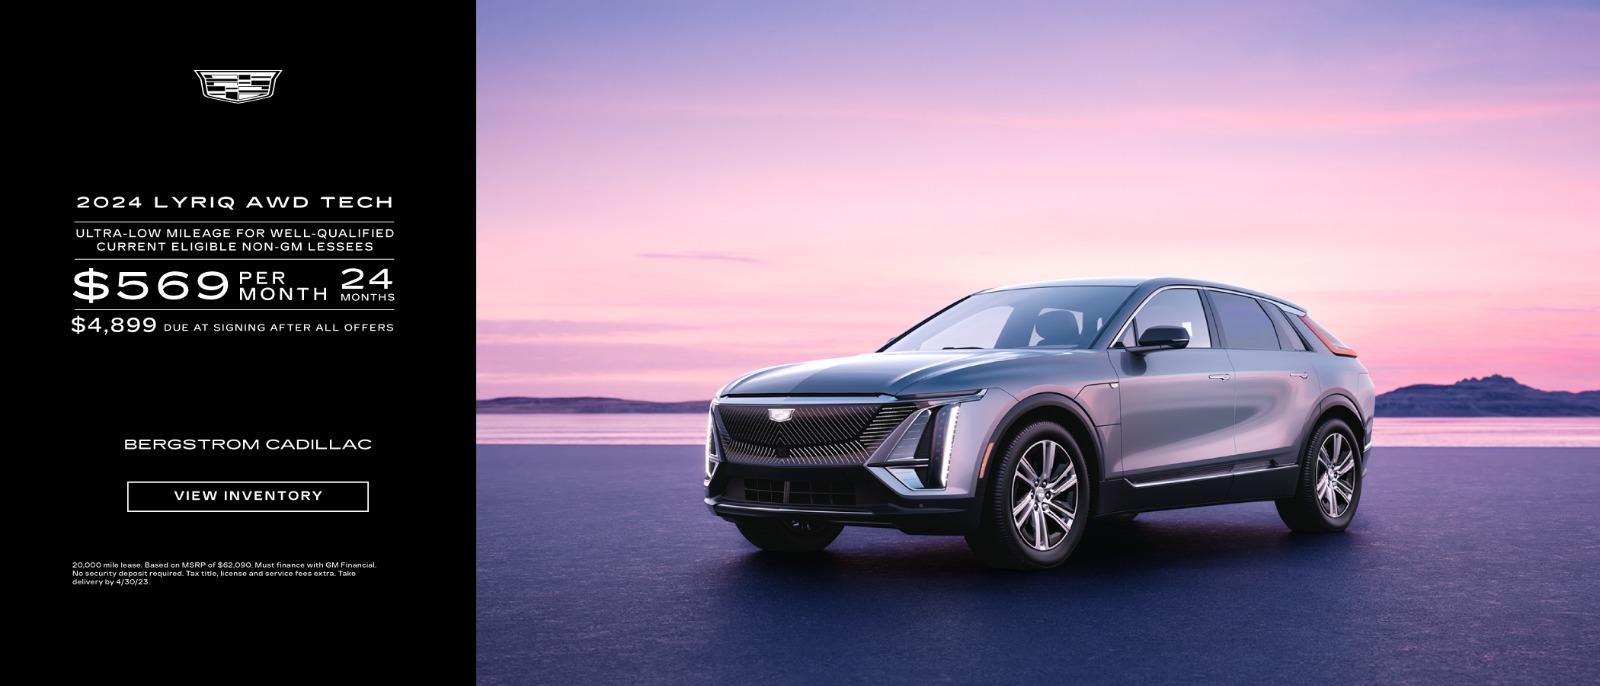 2024 Cadillac Lyriq Mobile lease for $569 per month for 24 months